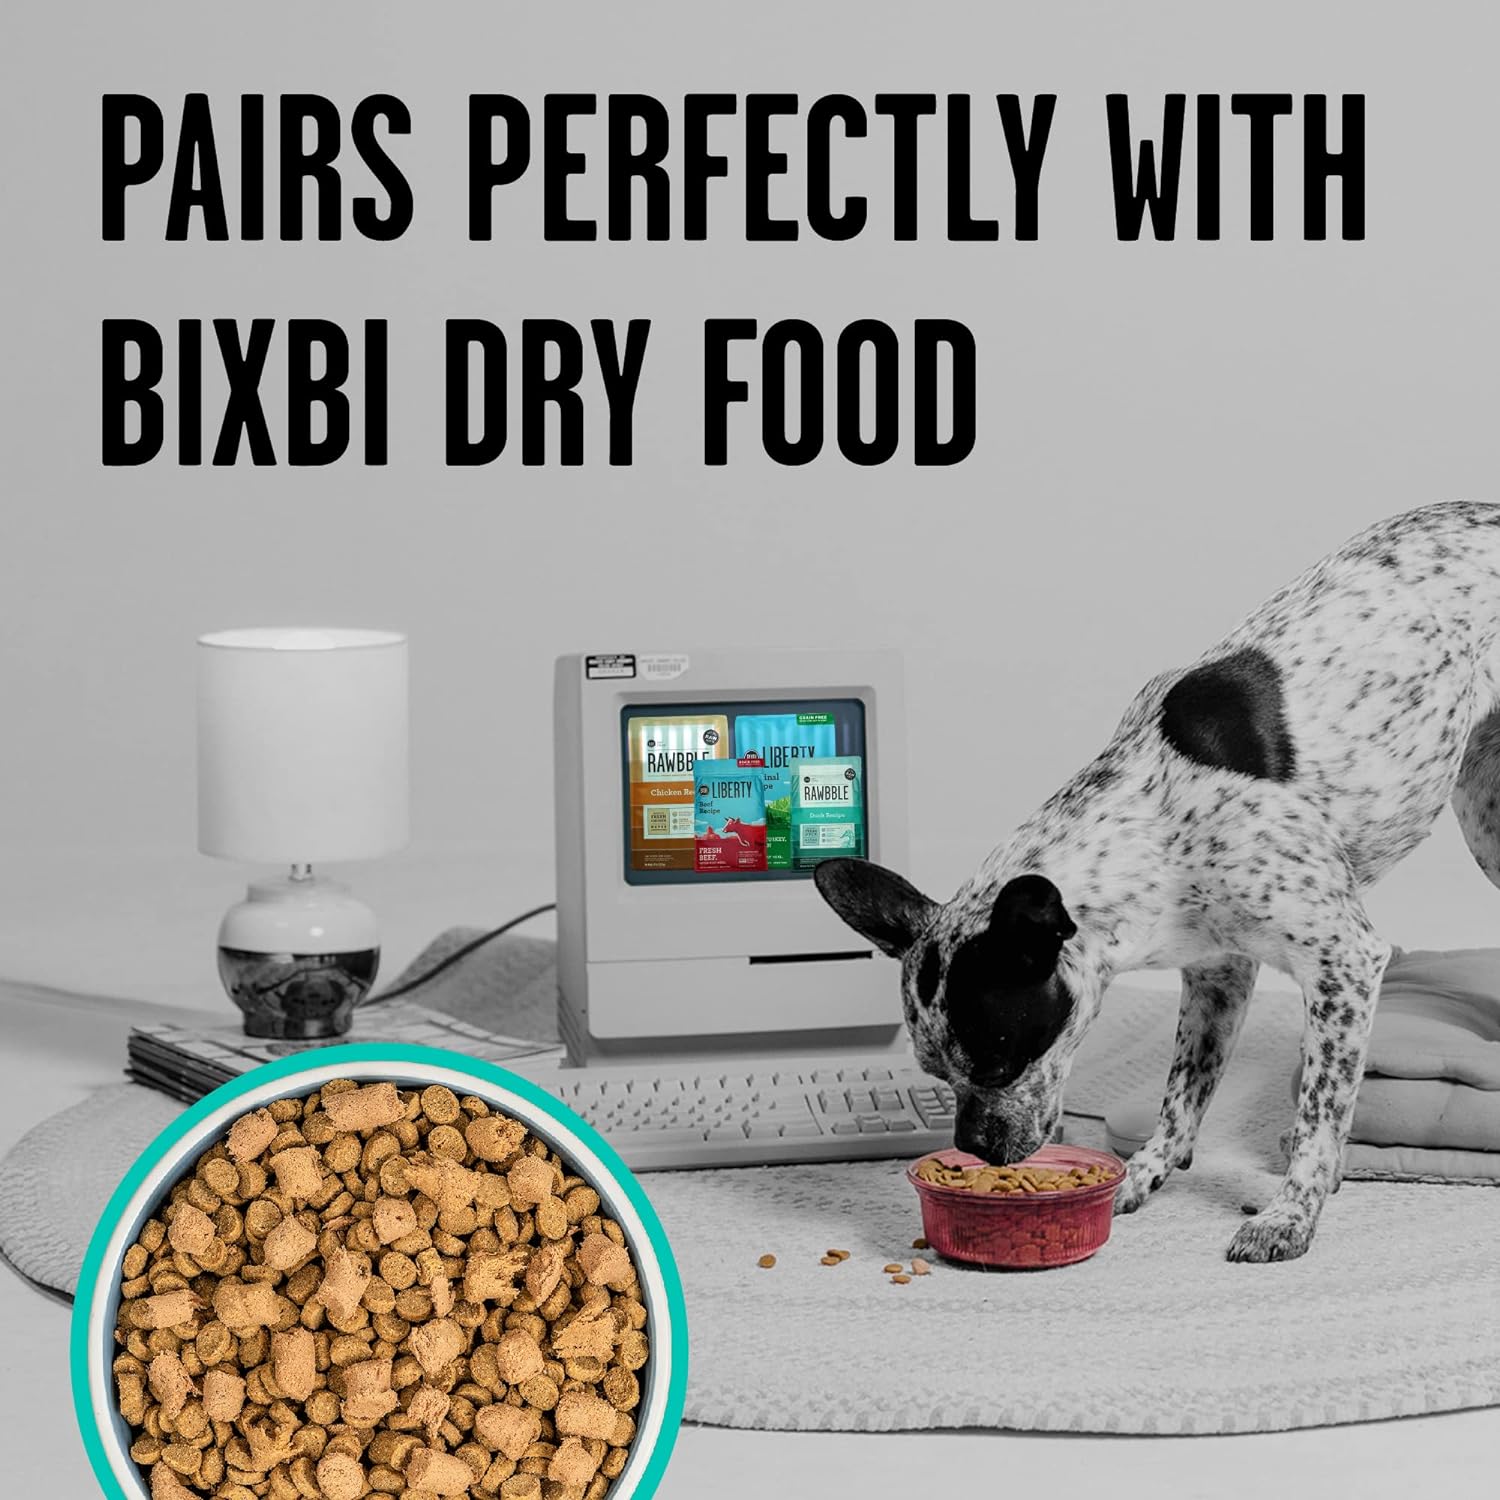 BIXBI Rawbble Freeze Dried Dog Food, Duck Recipe, 26 oz - 95% Meat and Organs, No Fillers - Pantry-Friendly Raw Dog Food for Meal, Treat or Food Topper - USA Made in Small Batches : Pet Supplies